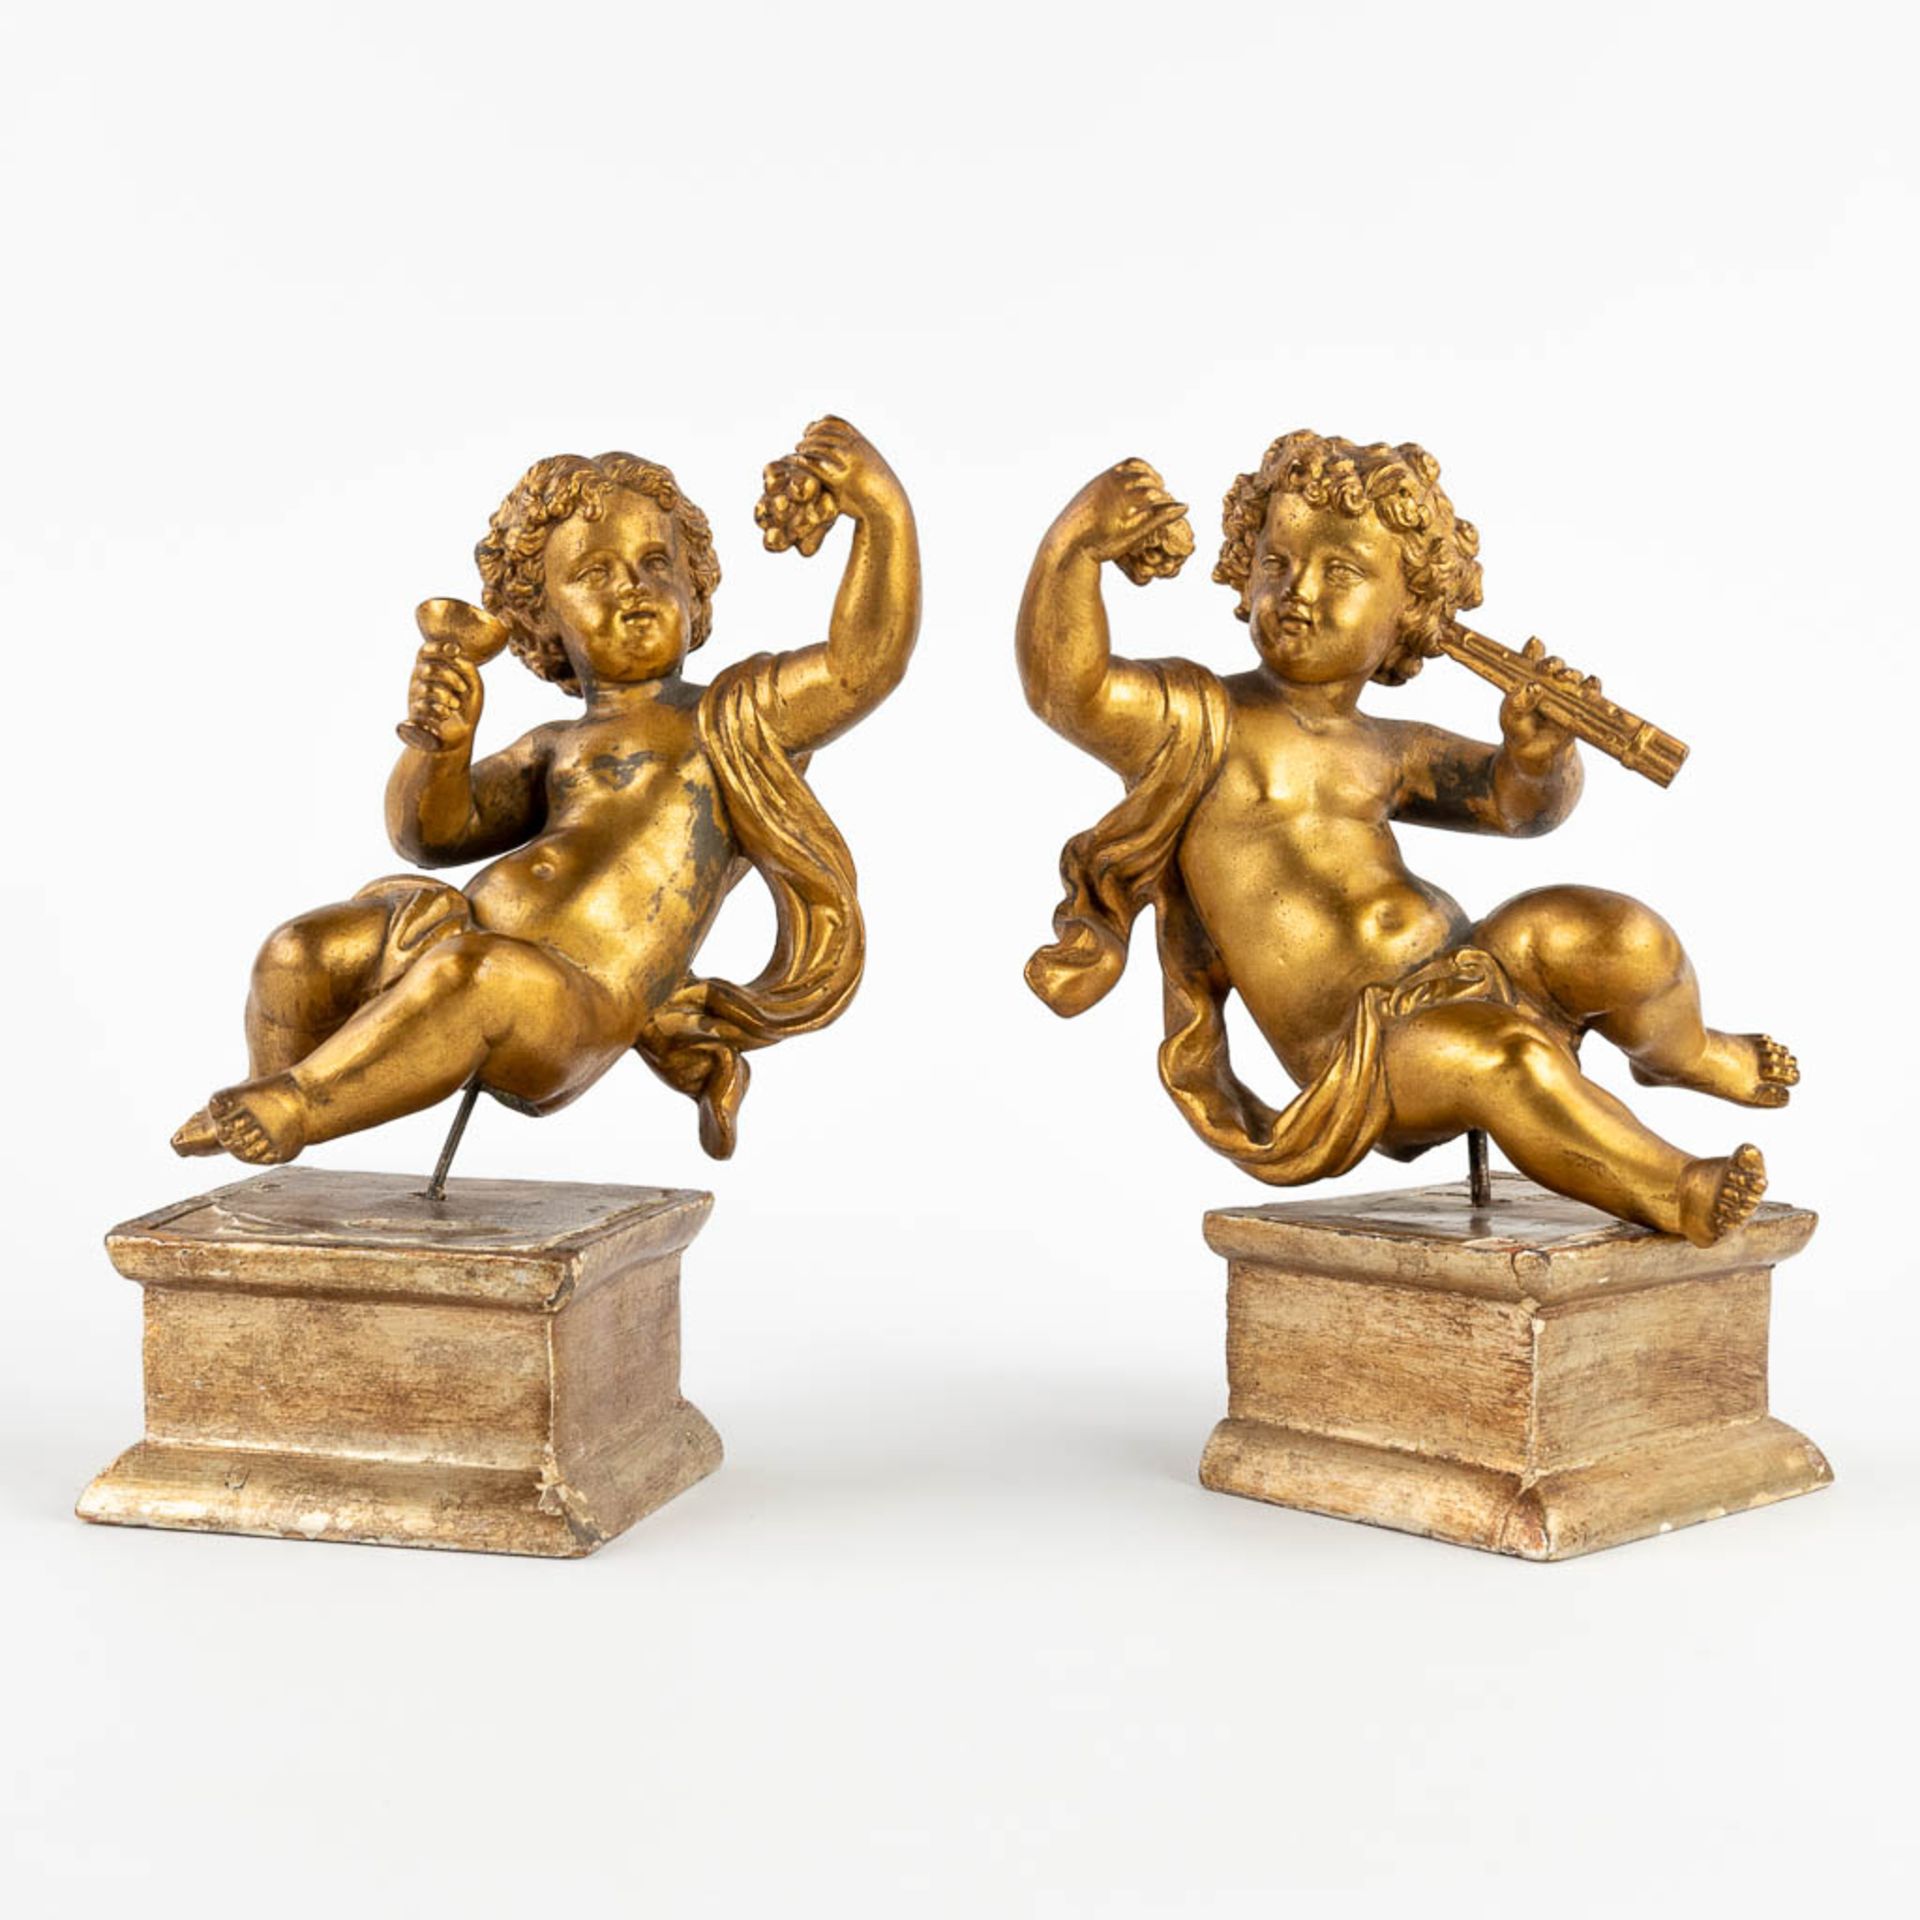 A pair of angels, gilt spelter and mounted on a wood base. 19th C. (W:12 x H:18 cm) - Image 3 of 14